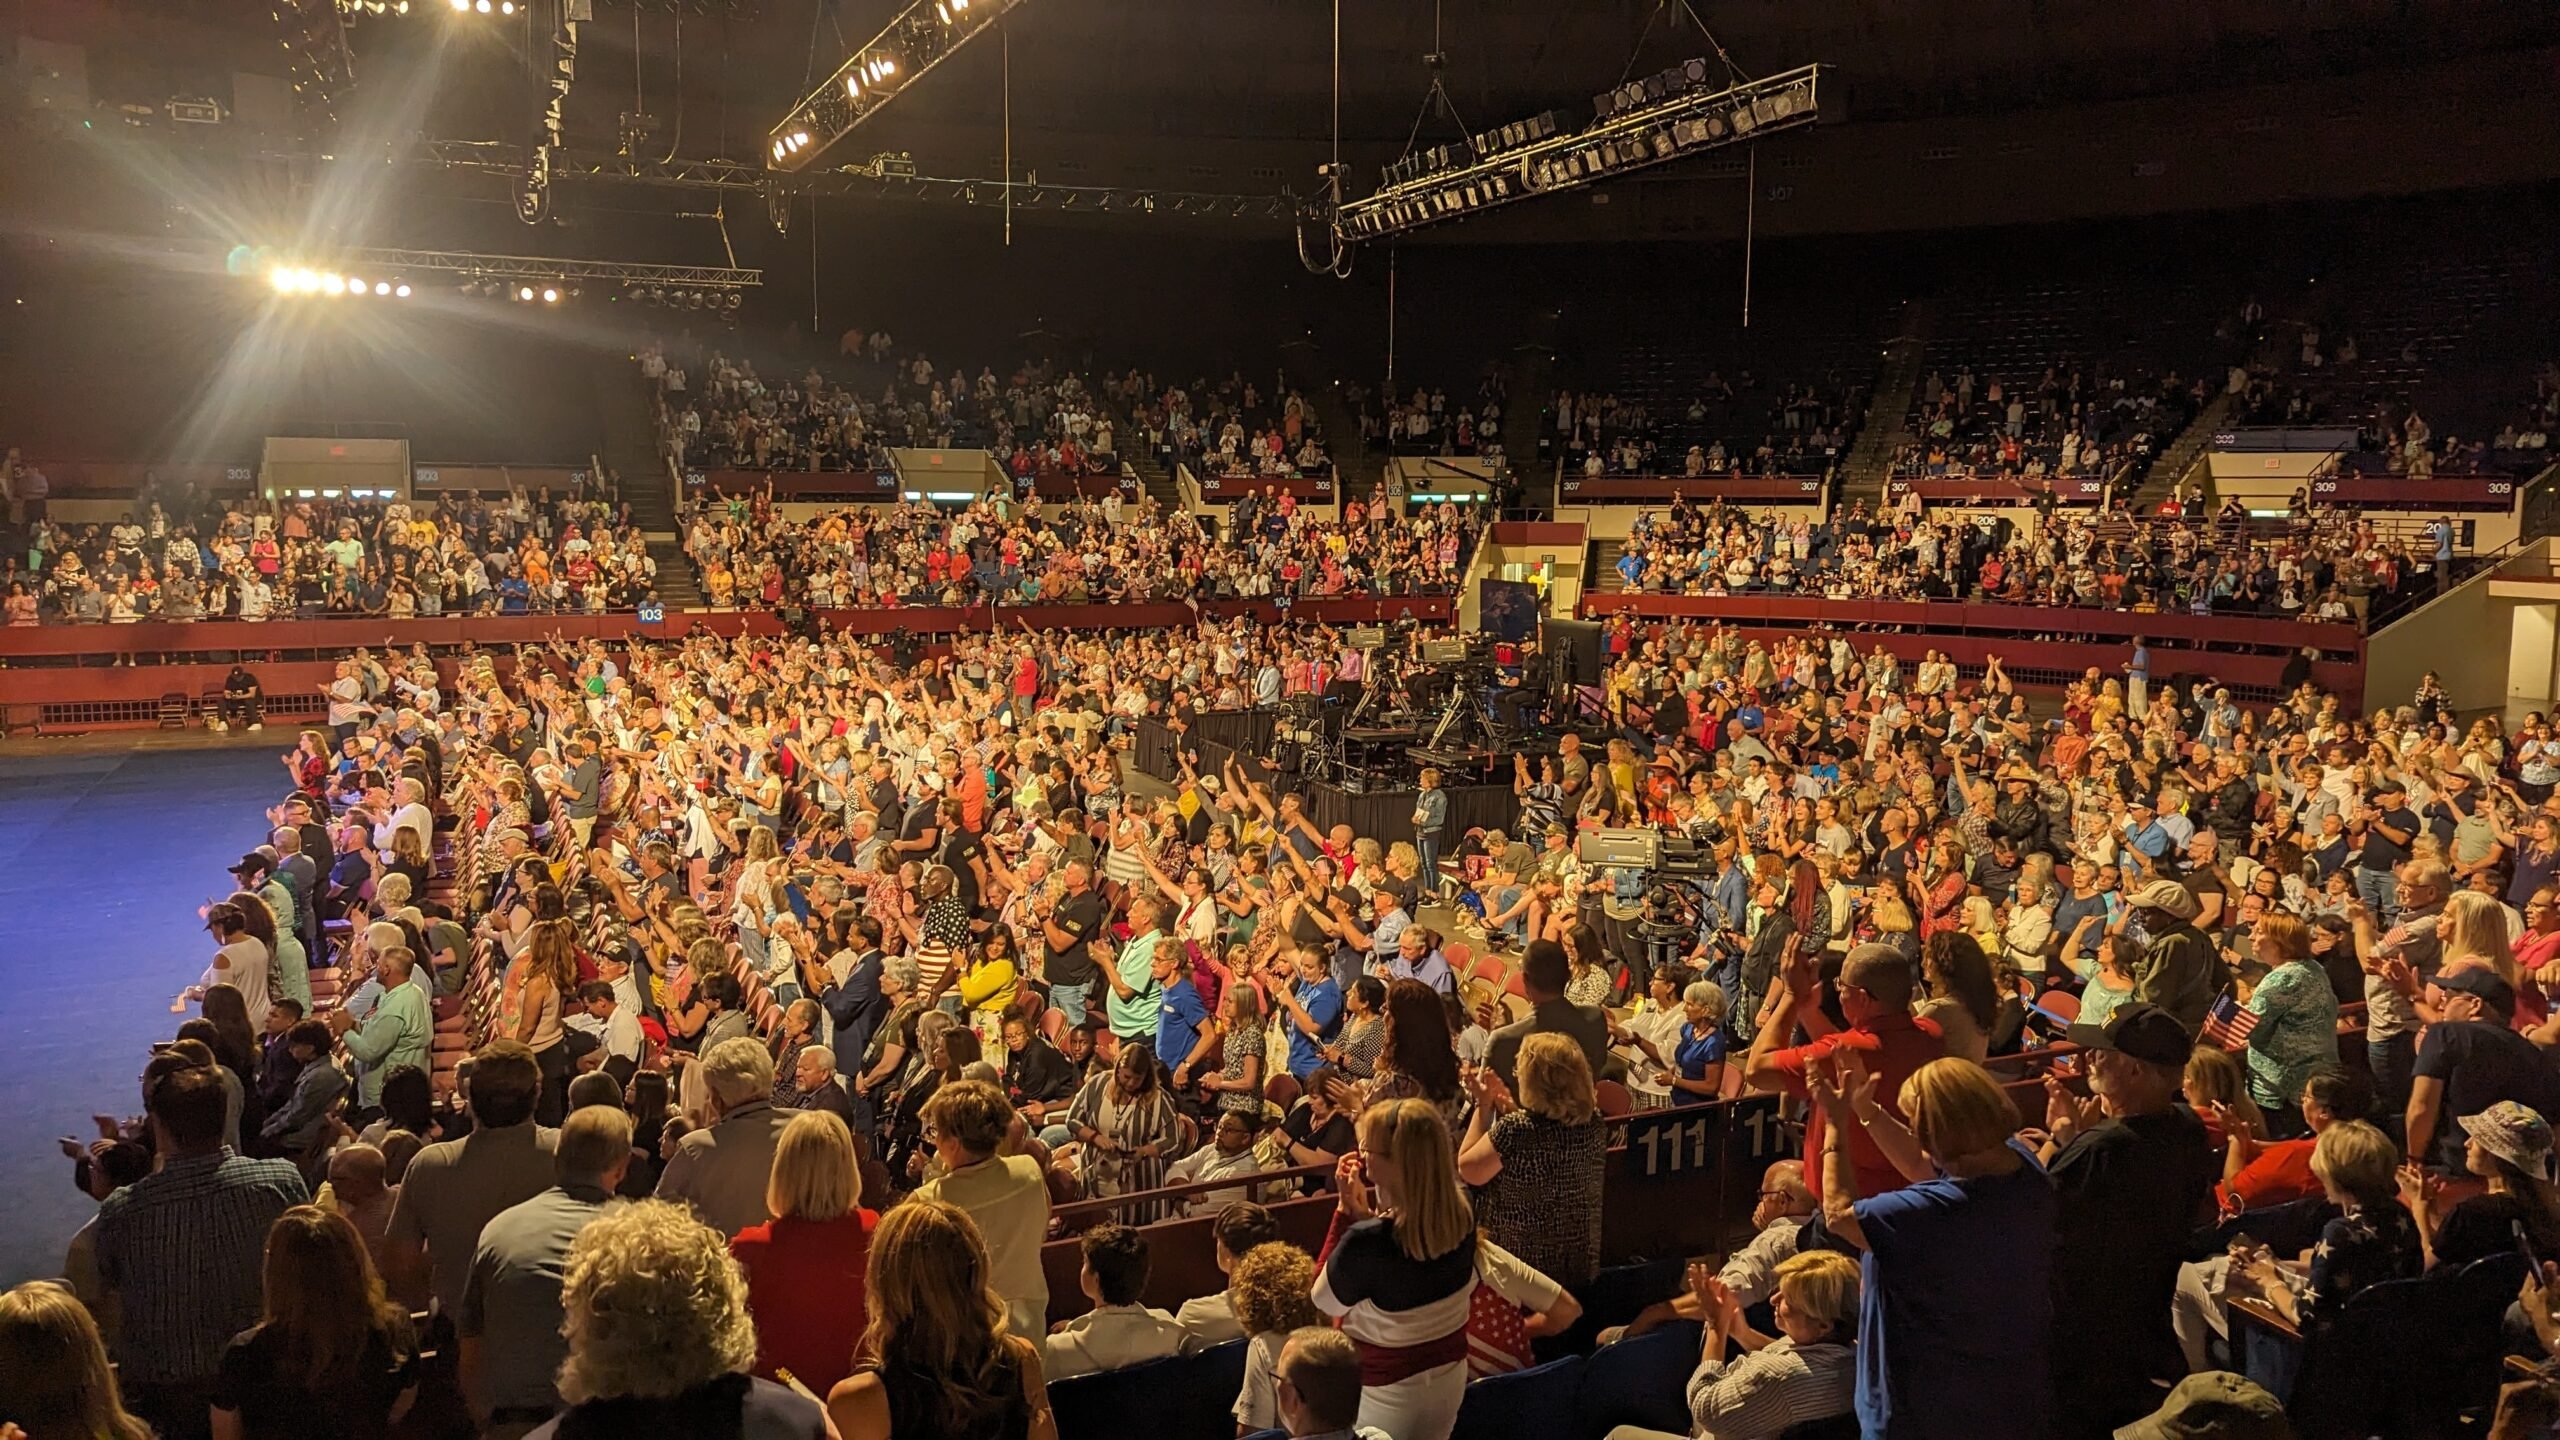 The crowd at the Southwest Believers’ Convention